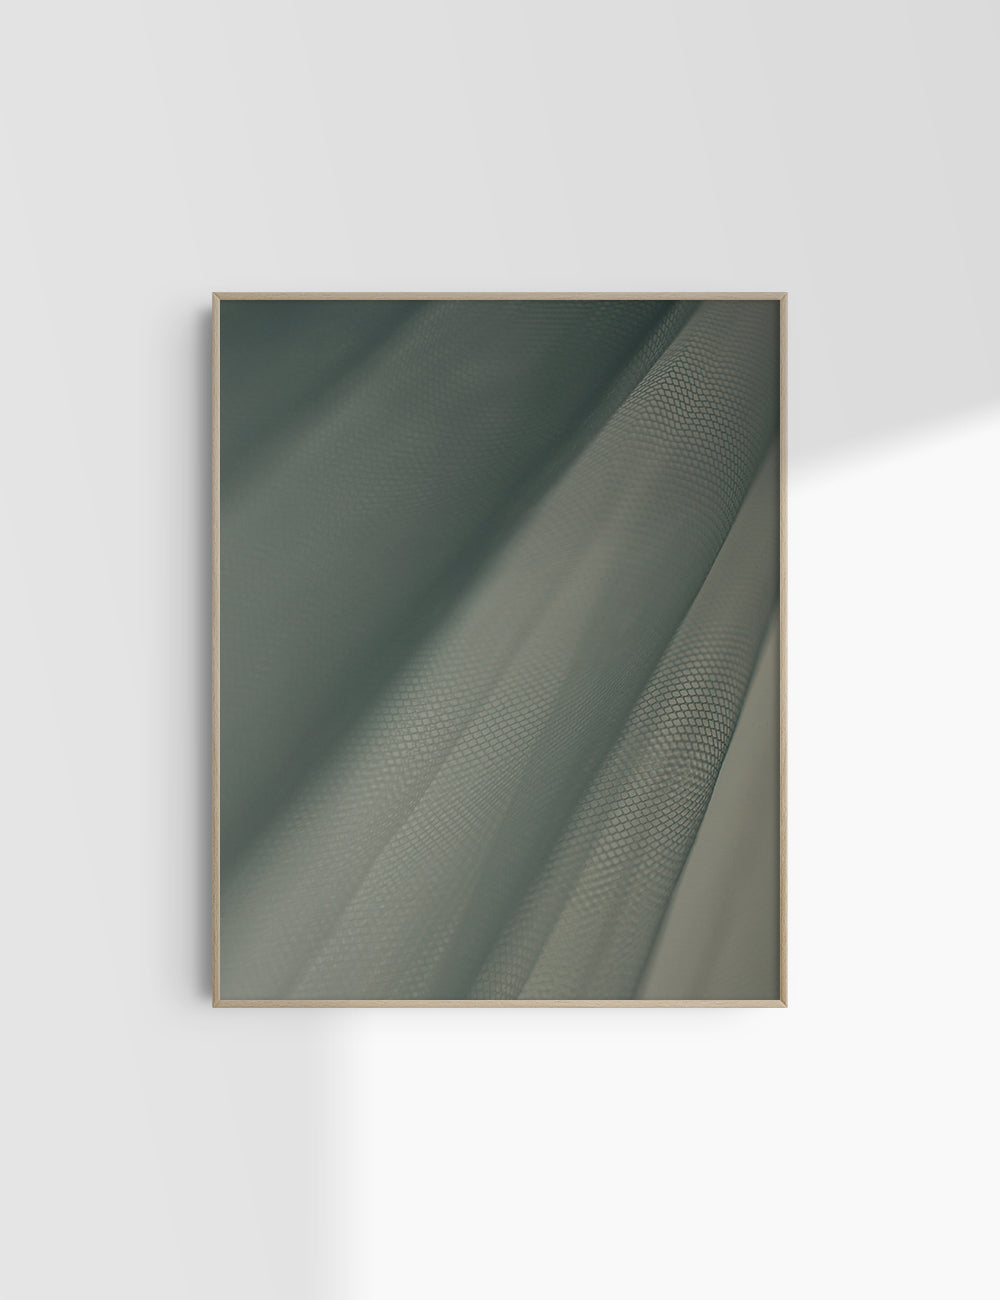 Abstract minimalist photography 2.4 Green aesthetic. Printable wall art photography. PAPER MOON Art & Design